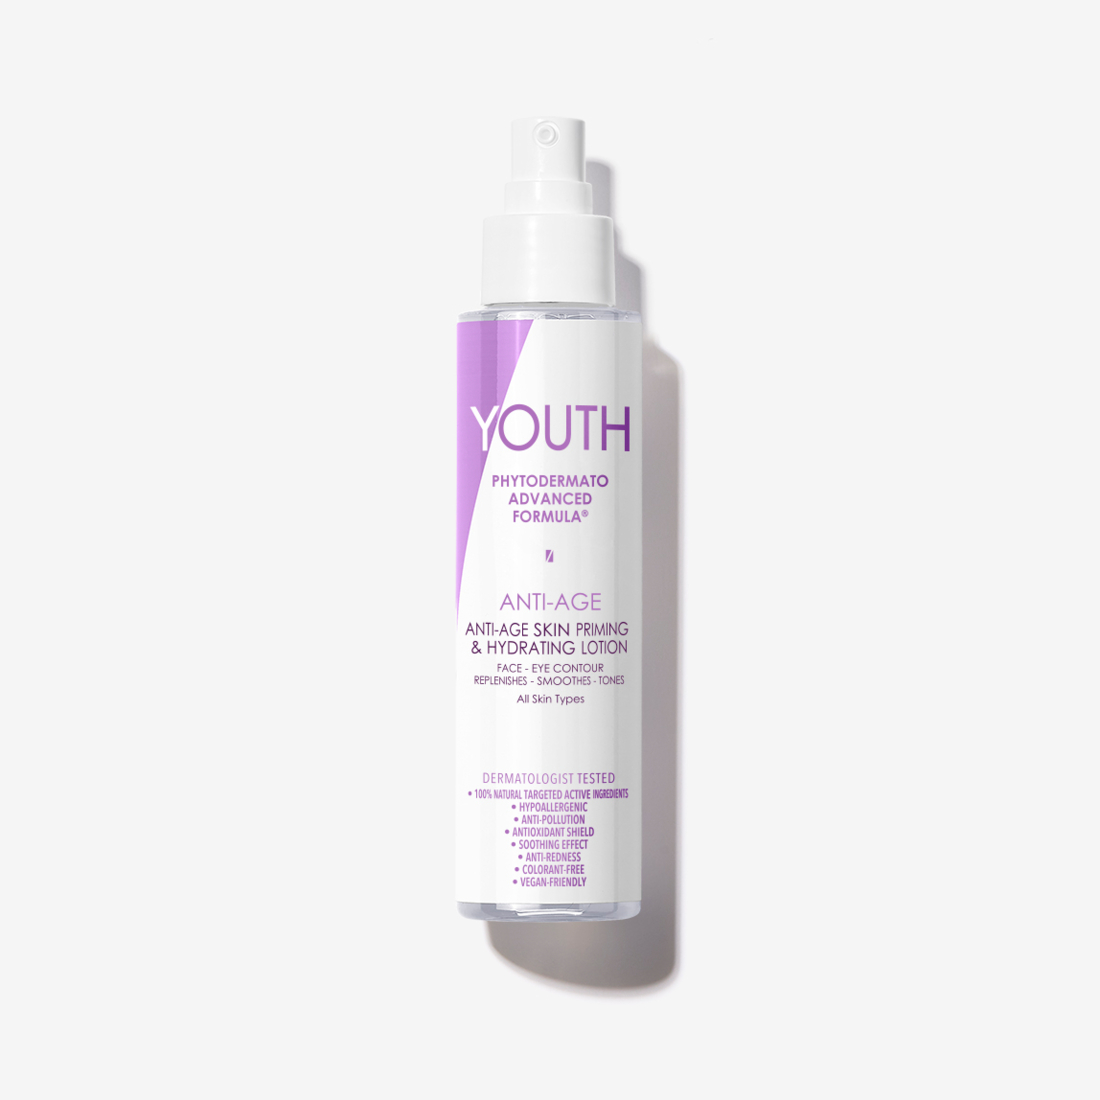 Anti-Age Skin Priming and Hydrating Lotion